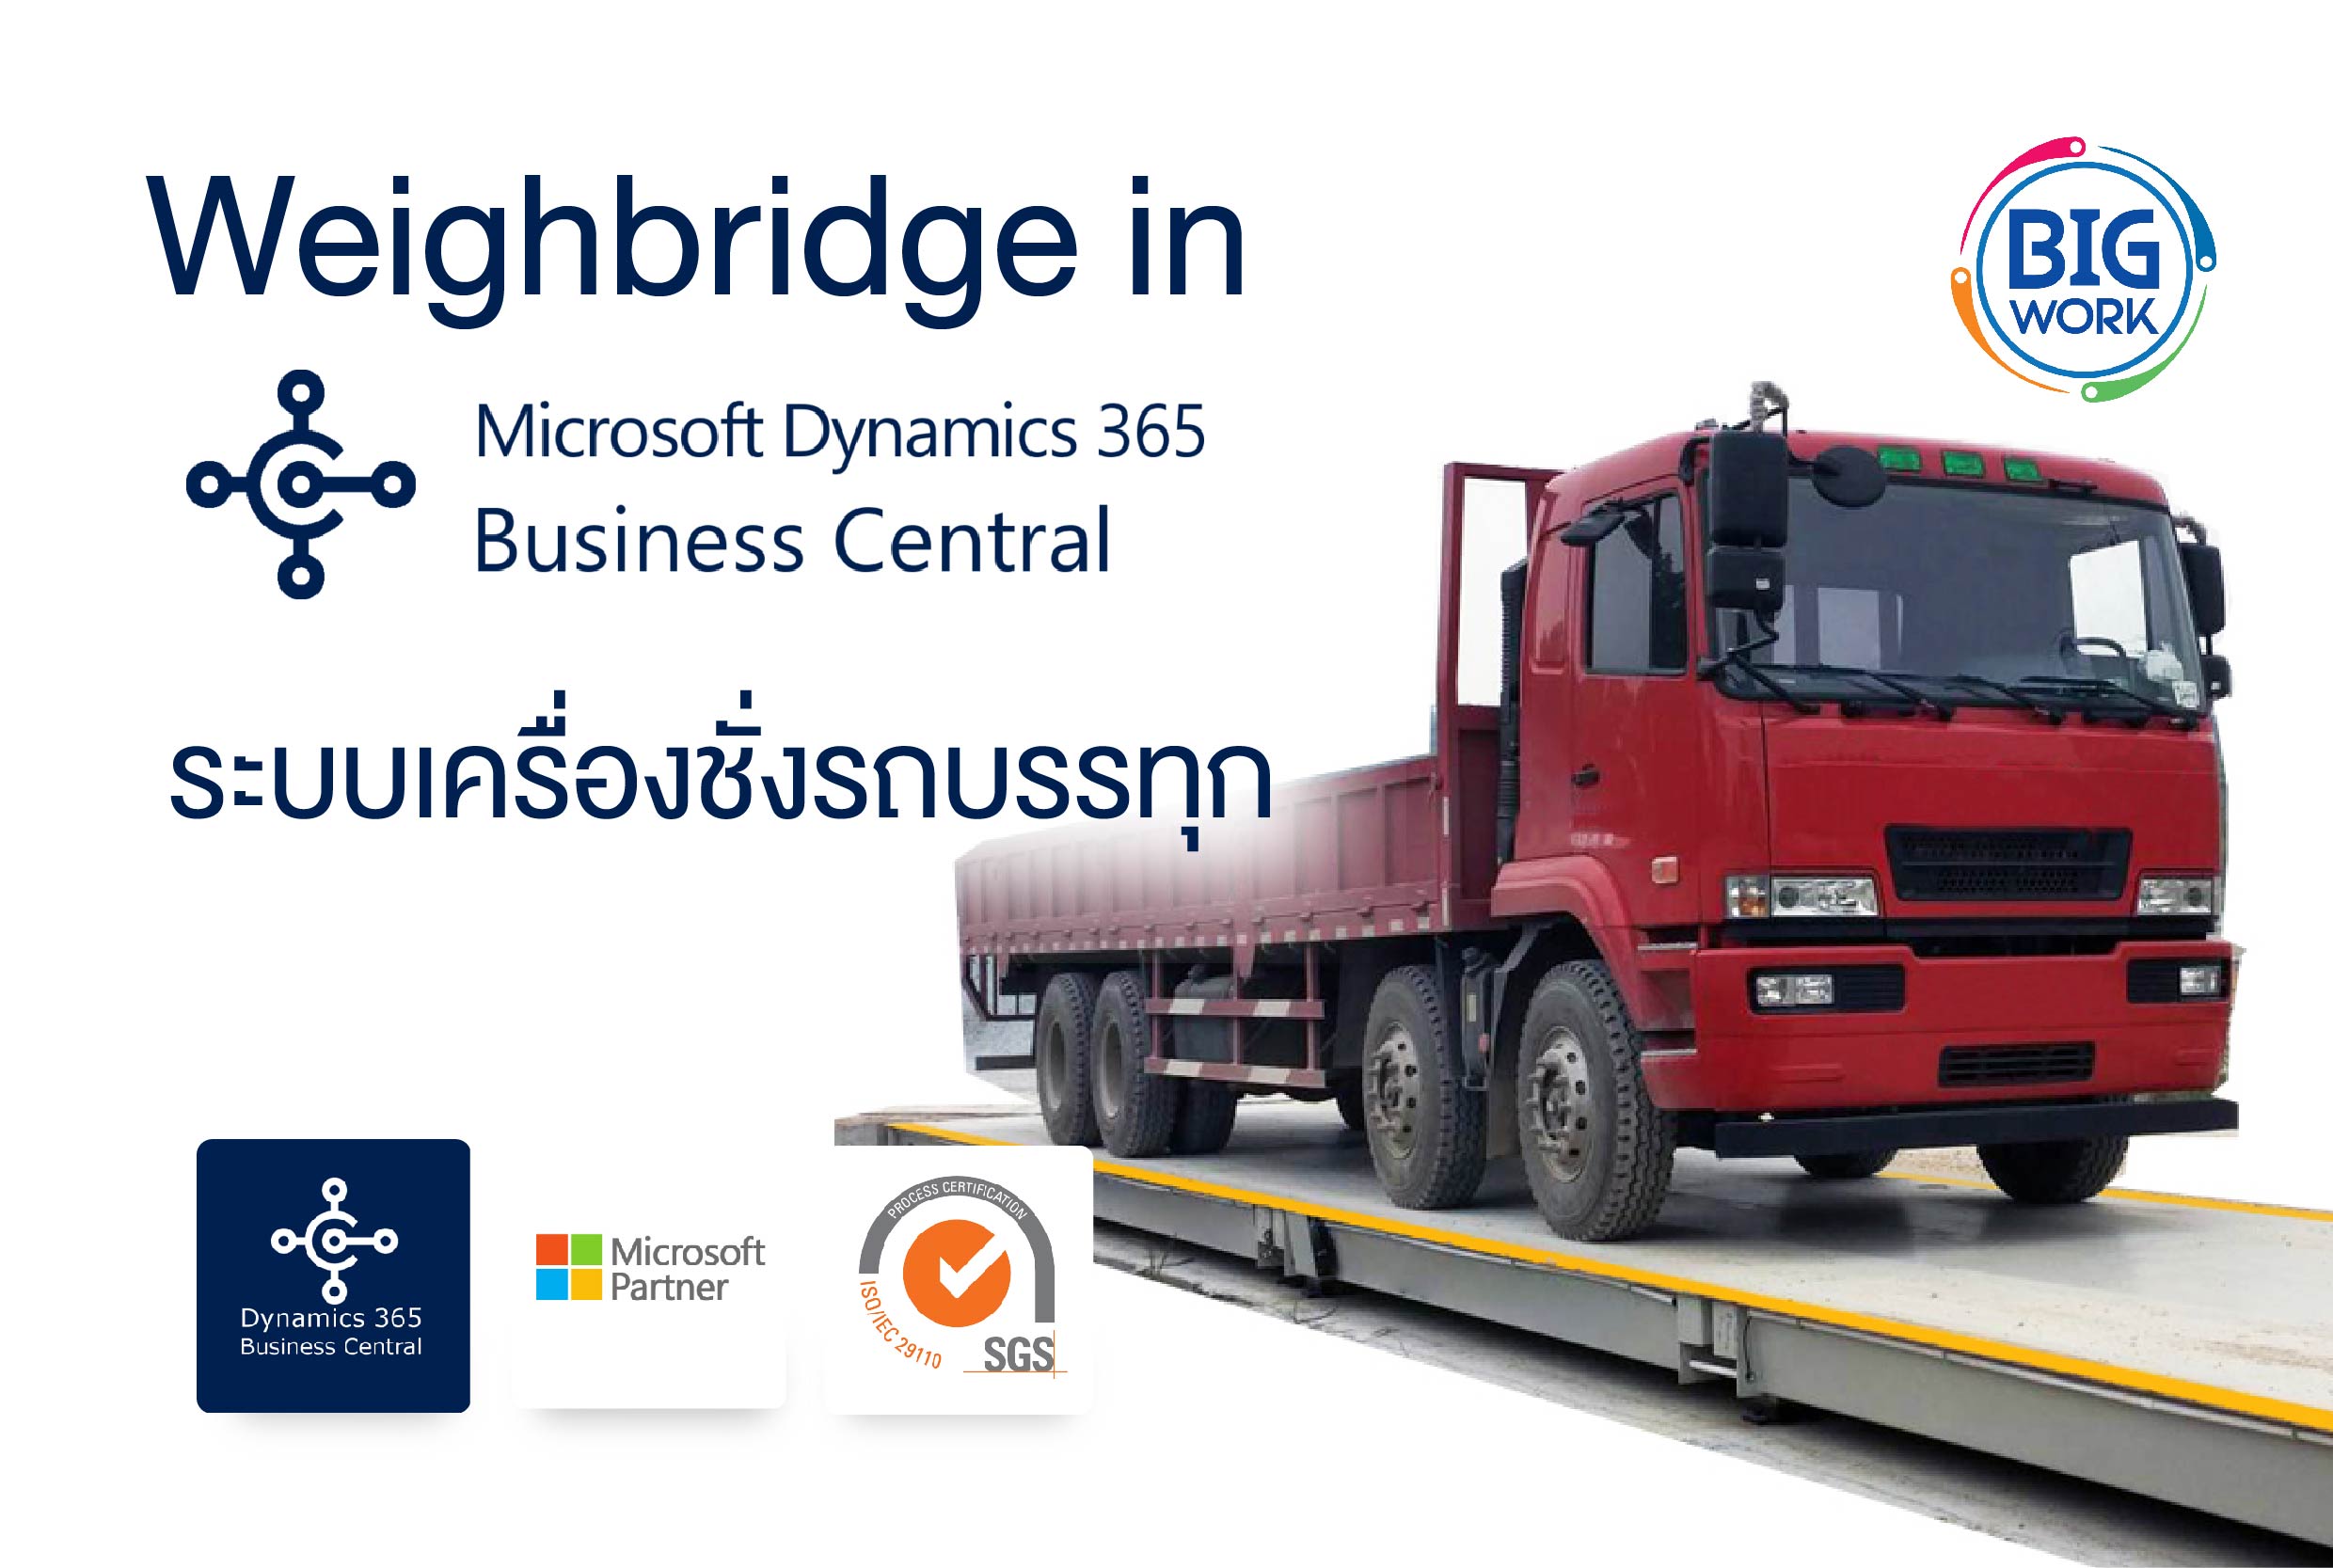 Weighbridge in Dynamics 365 Business Central